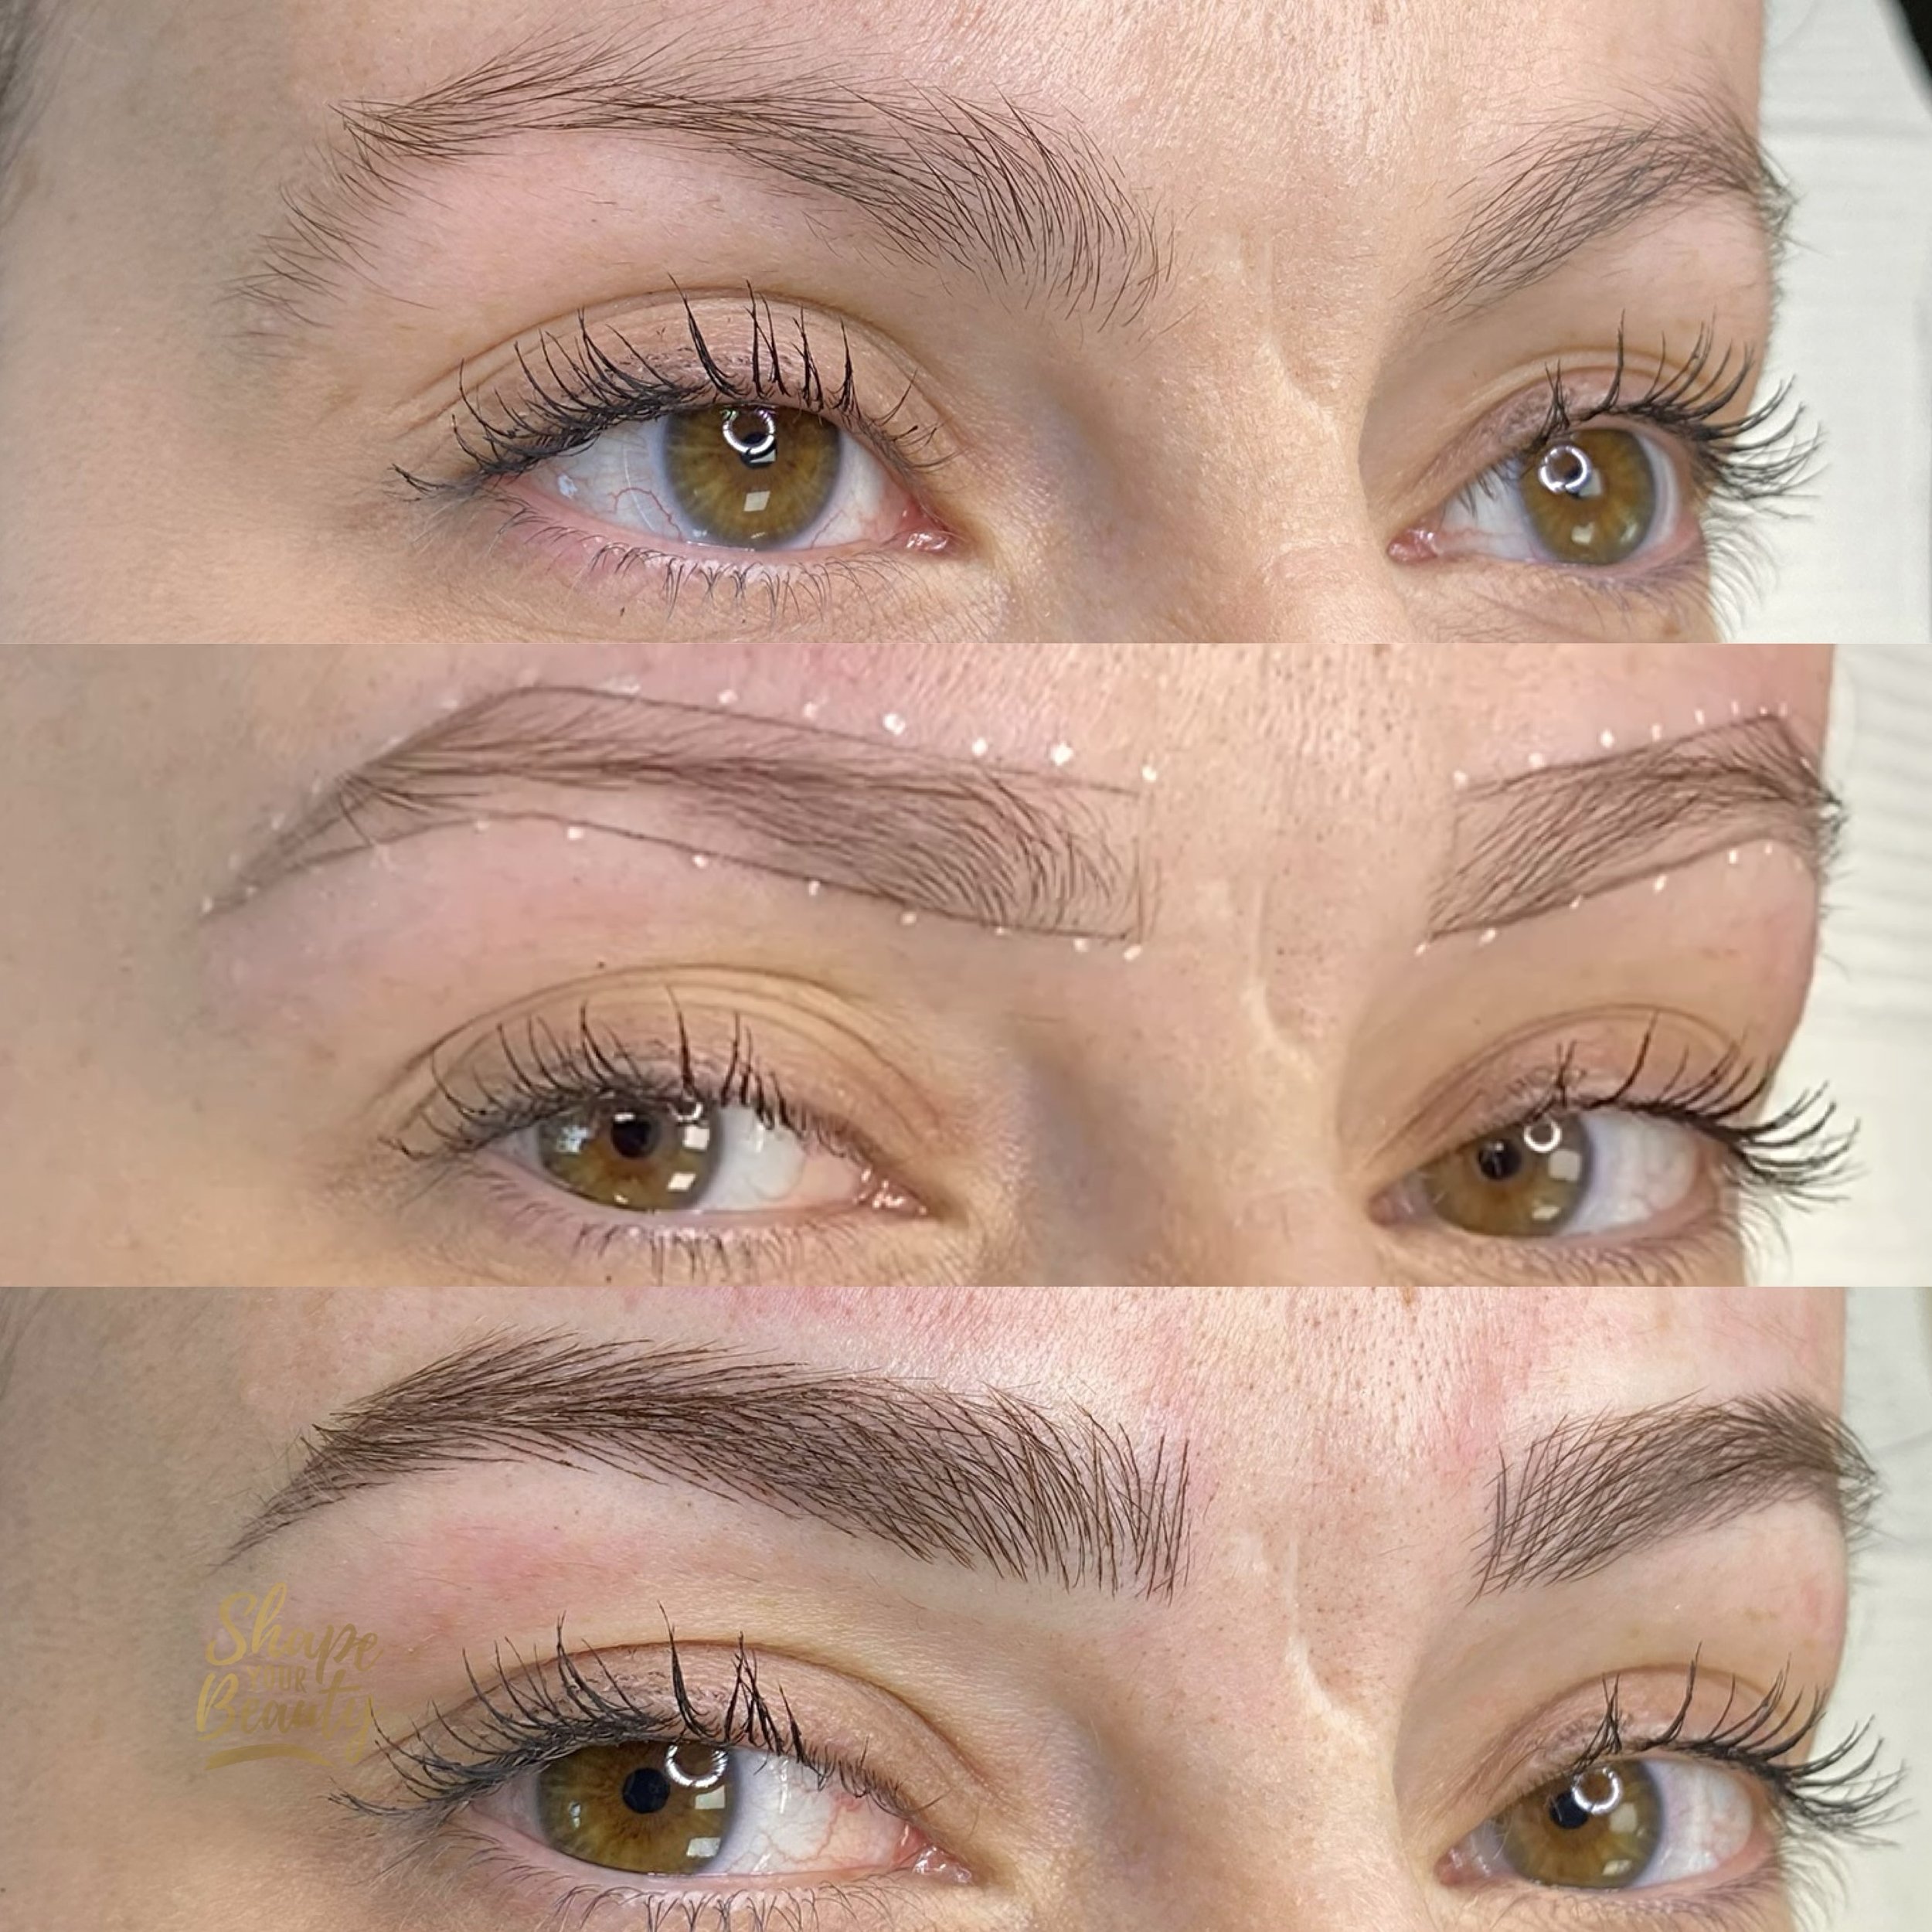 &ldquo;Embrace the beauty of natural perfection with our flawlessly fluffy microblading! 💖 Unveil the fresh, radiant you effortlessly. #NaturalBeauty #FluffyBrows #MicrobladingMagic #arizona #az #michigan #detroit #beauty #love